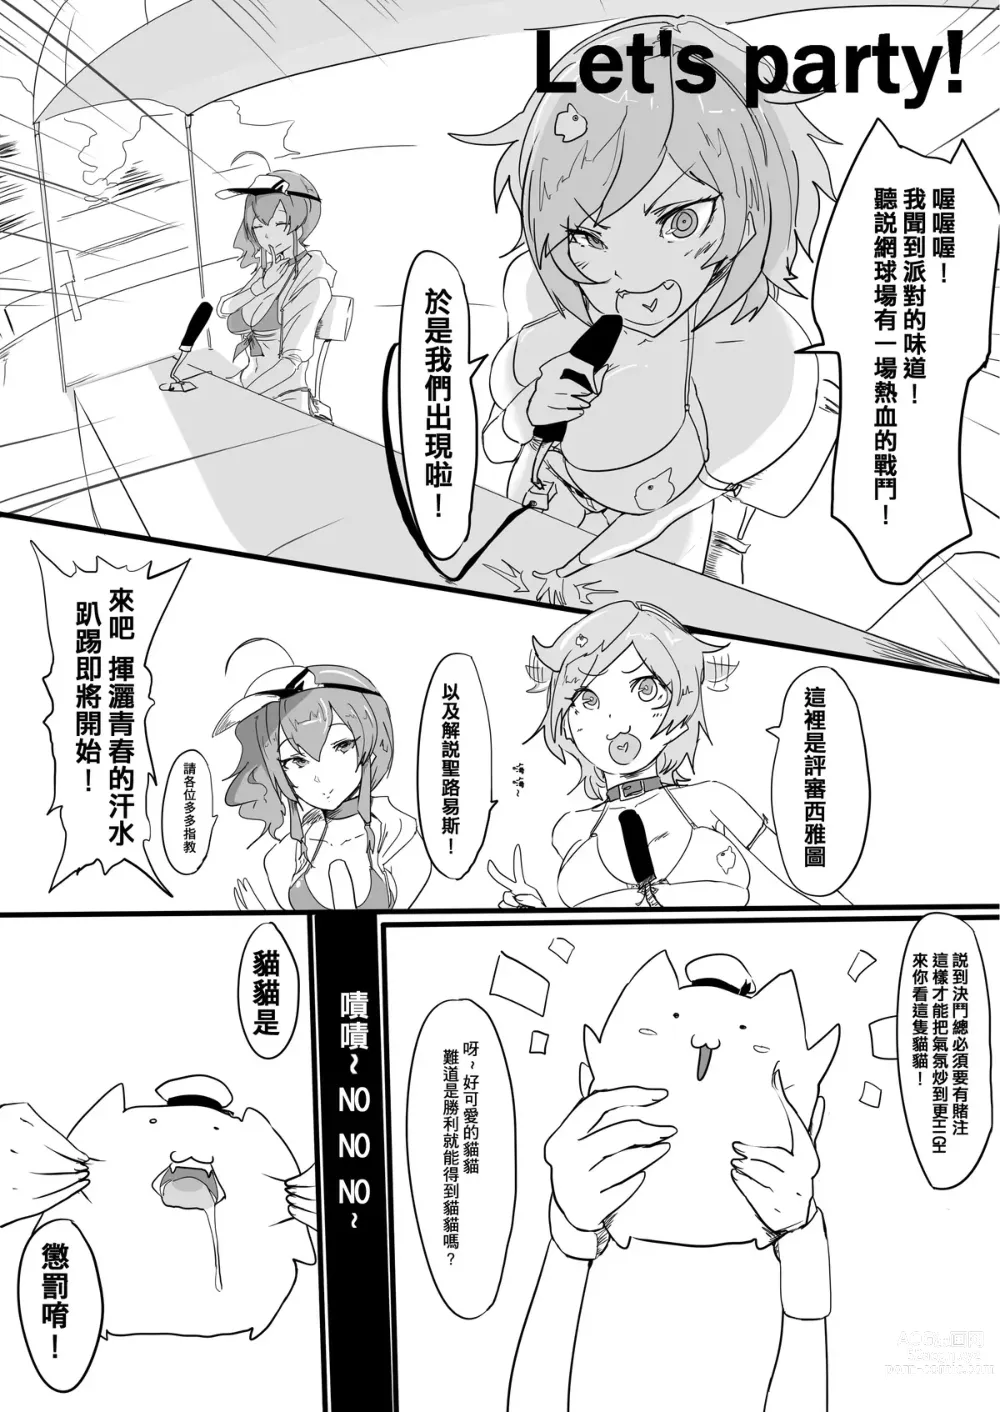 Page 3 of doujinshi Tennis party